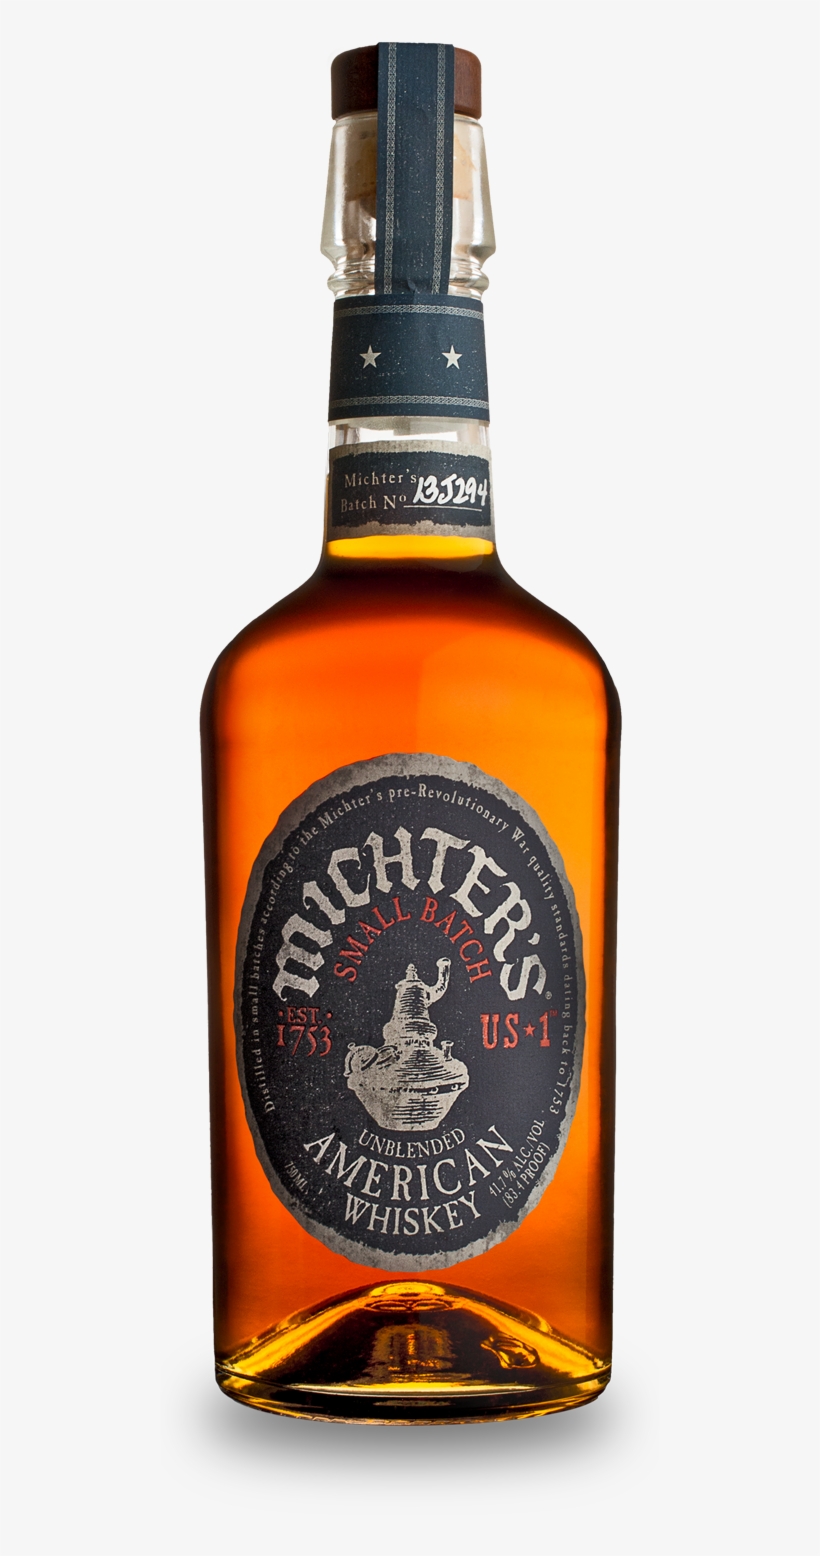 Michter's American Us Bourbon Whiskey - Michter's American Whiskey, transparent png #2018889